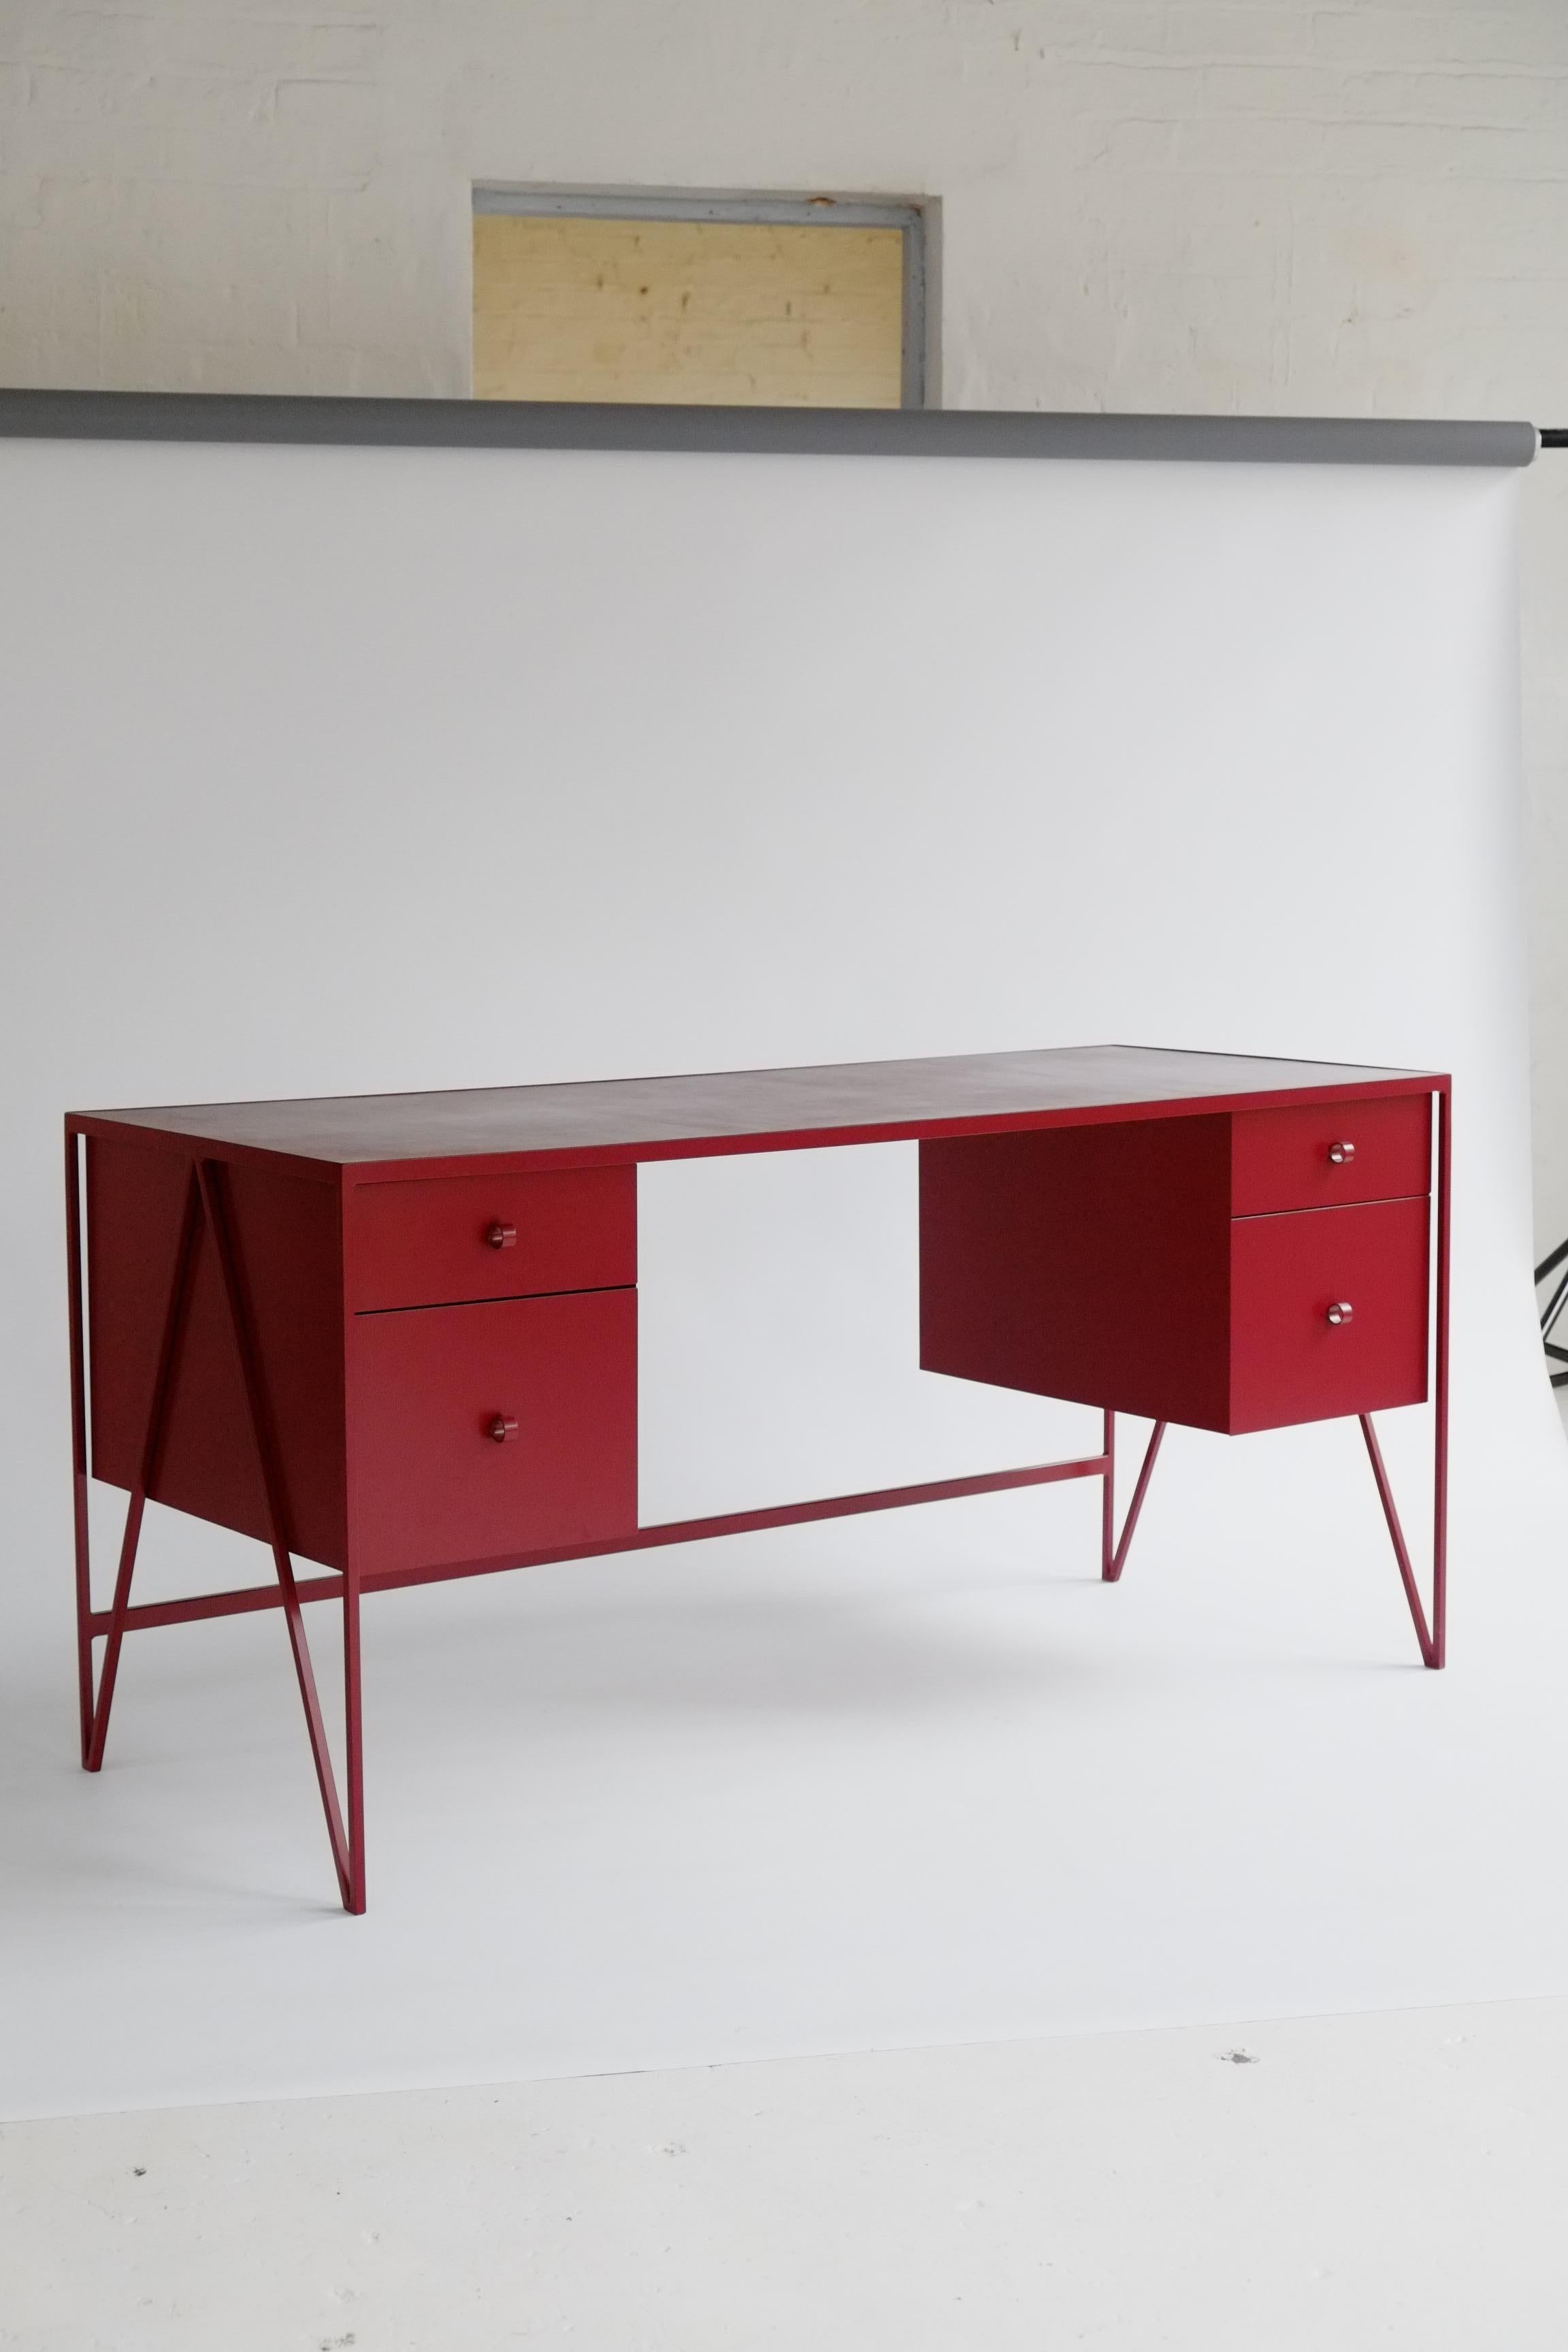 This large burgandy color study desk is made with a powder coated steel frame and a beautiful natural linoleum top made out of linseed oil. This modern minimal desk has four steel drawers suspended underneath the tabletop and Loop handles for pulls.